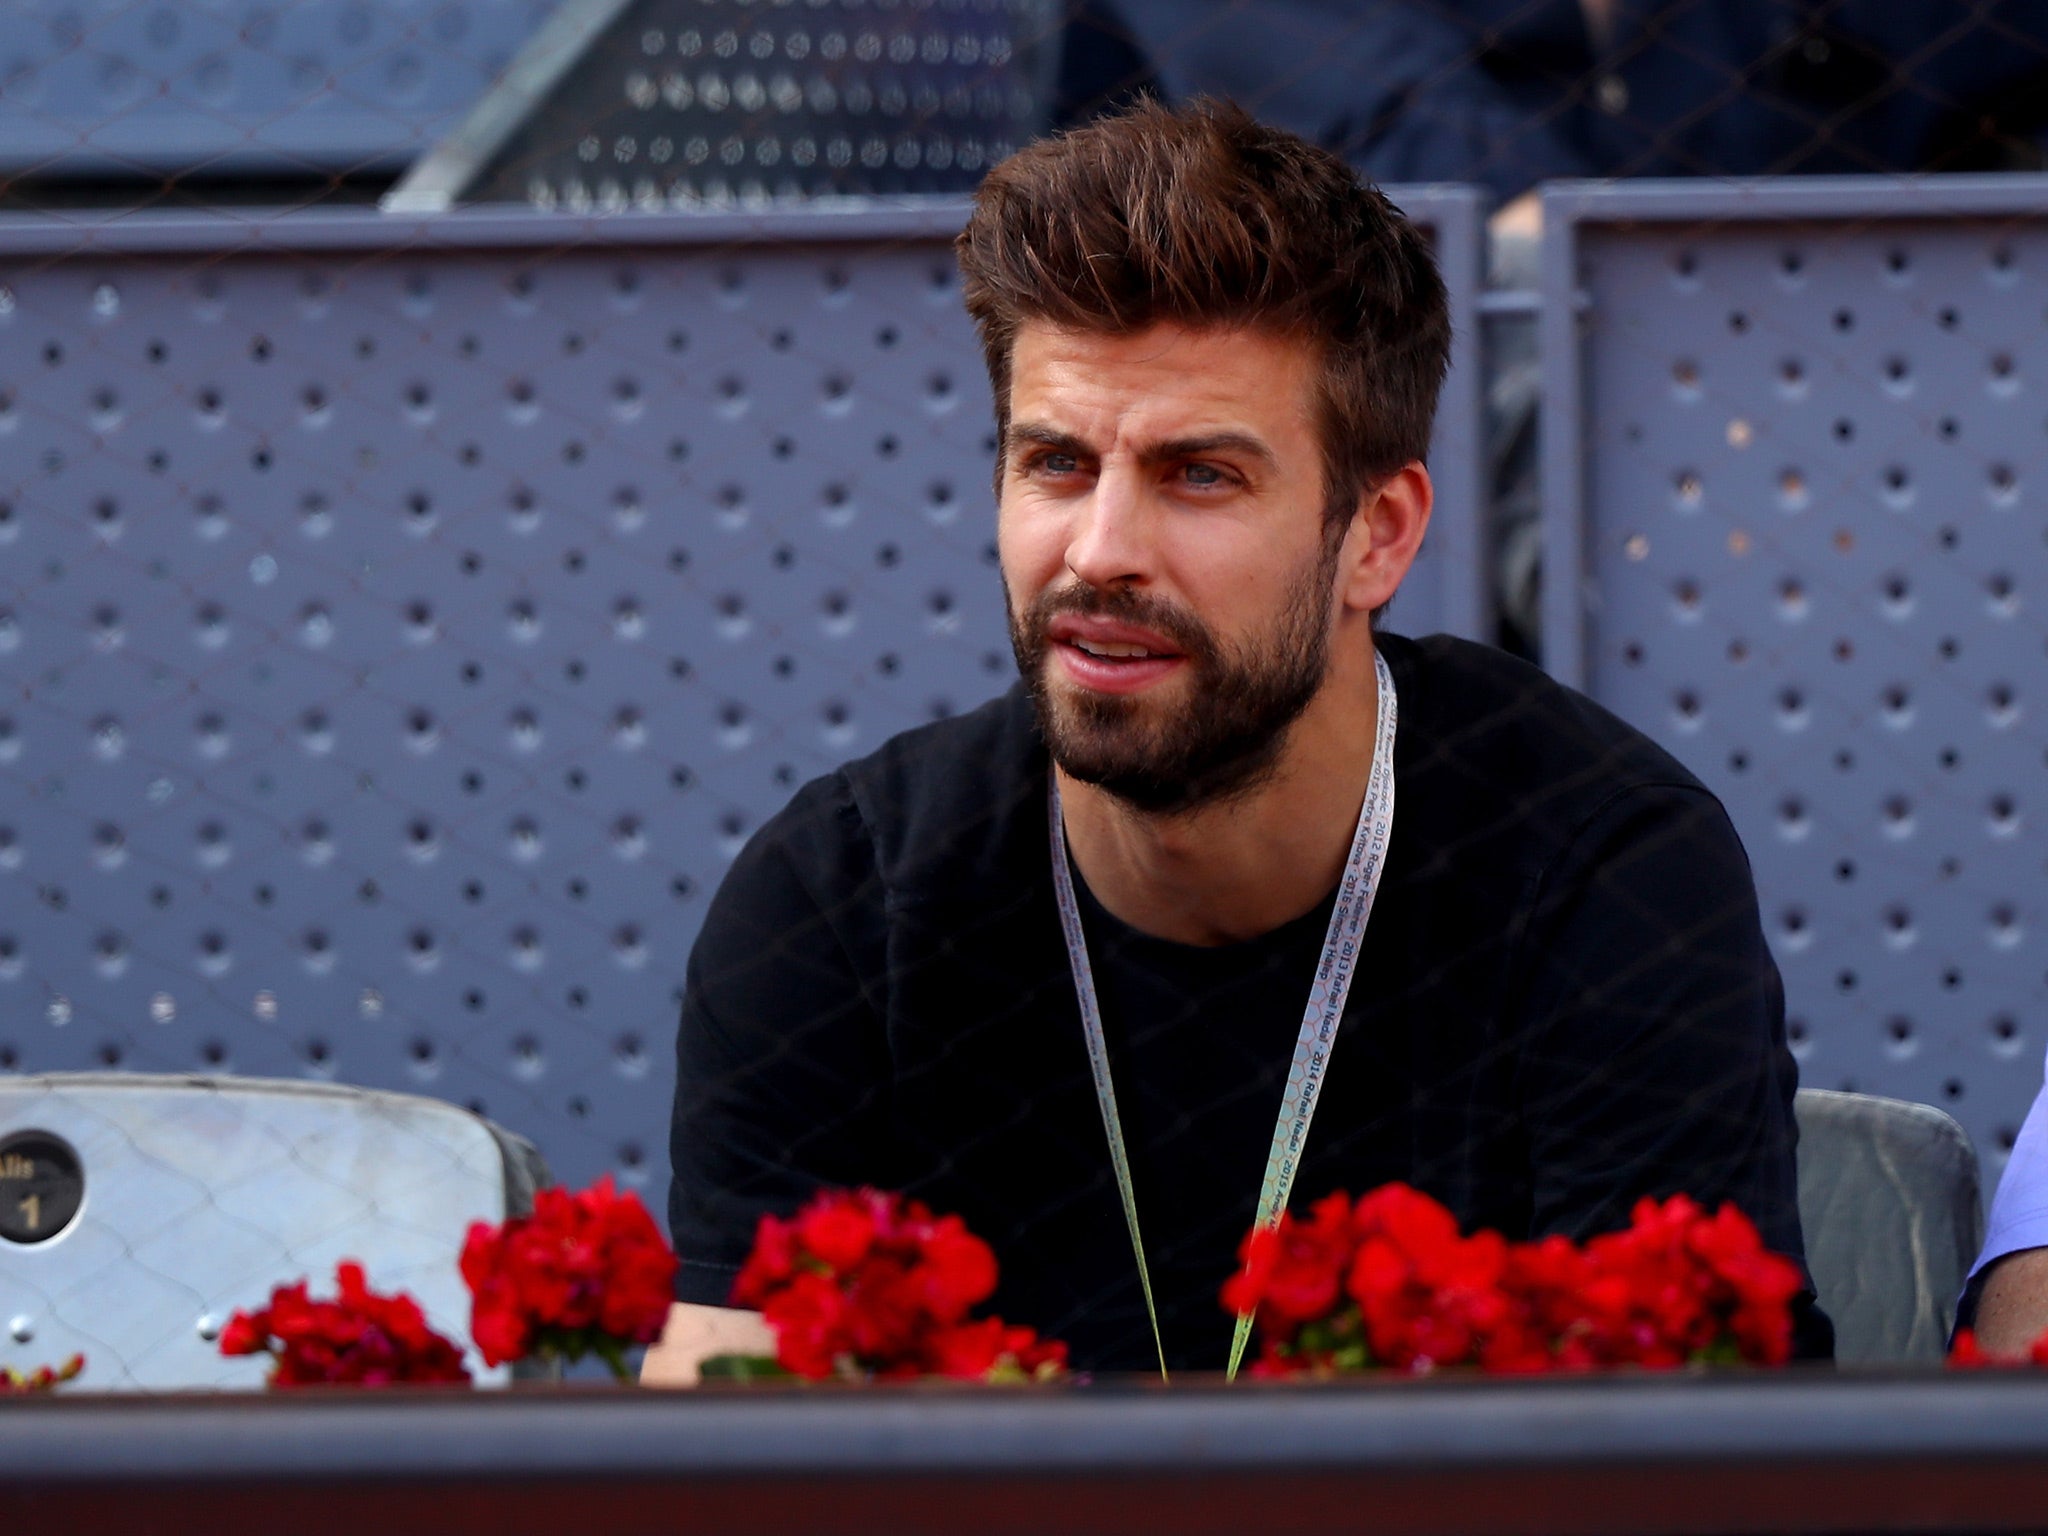 Gerard Pique is turning his hand to tennis in a bid to improve the Davis Cup